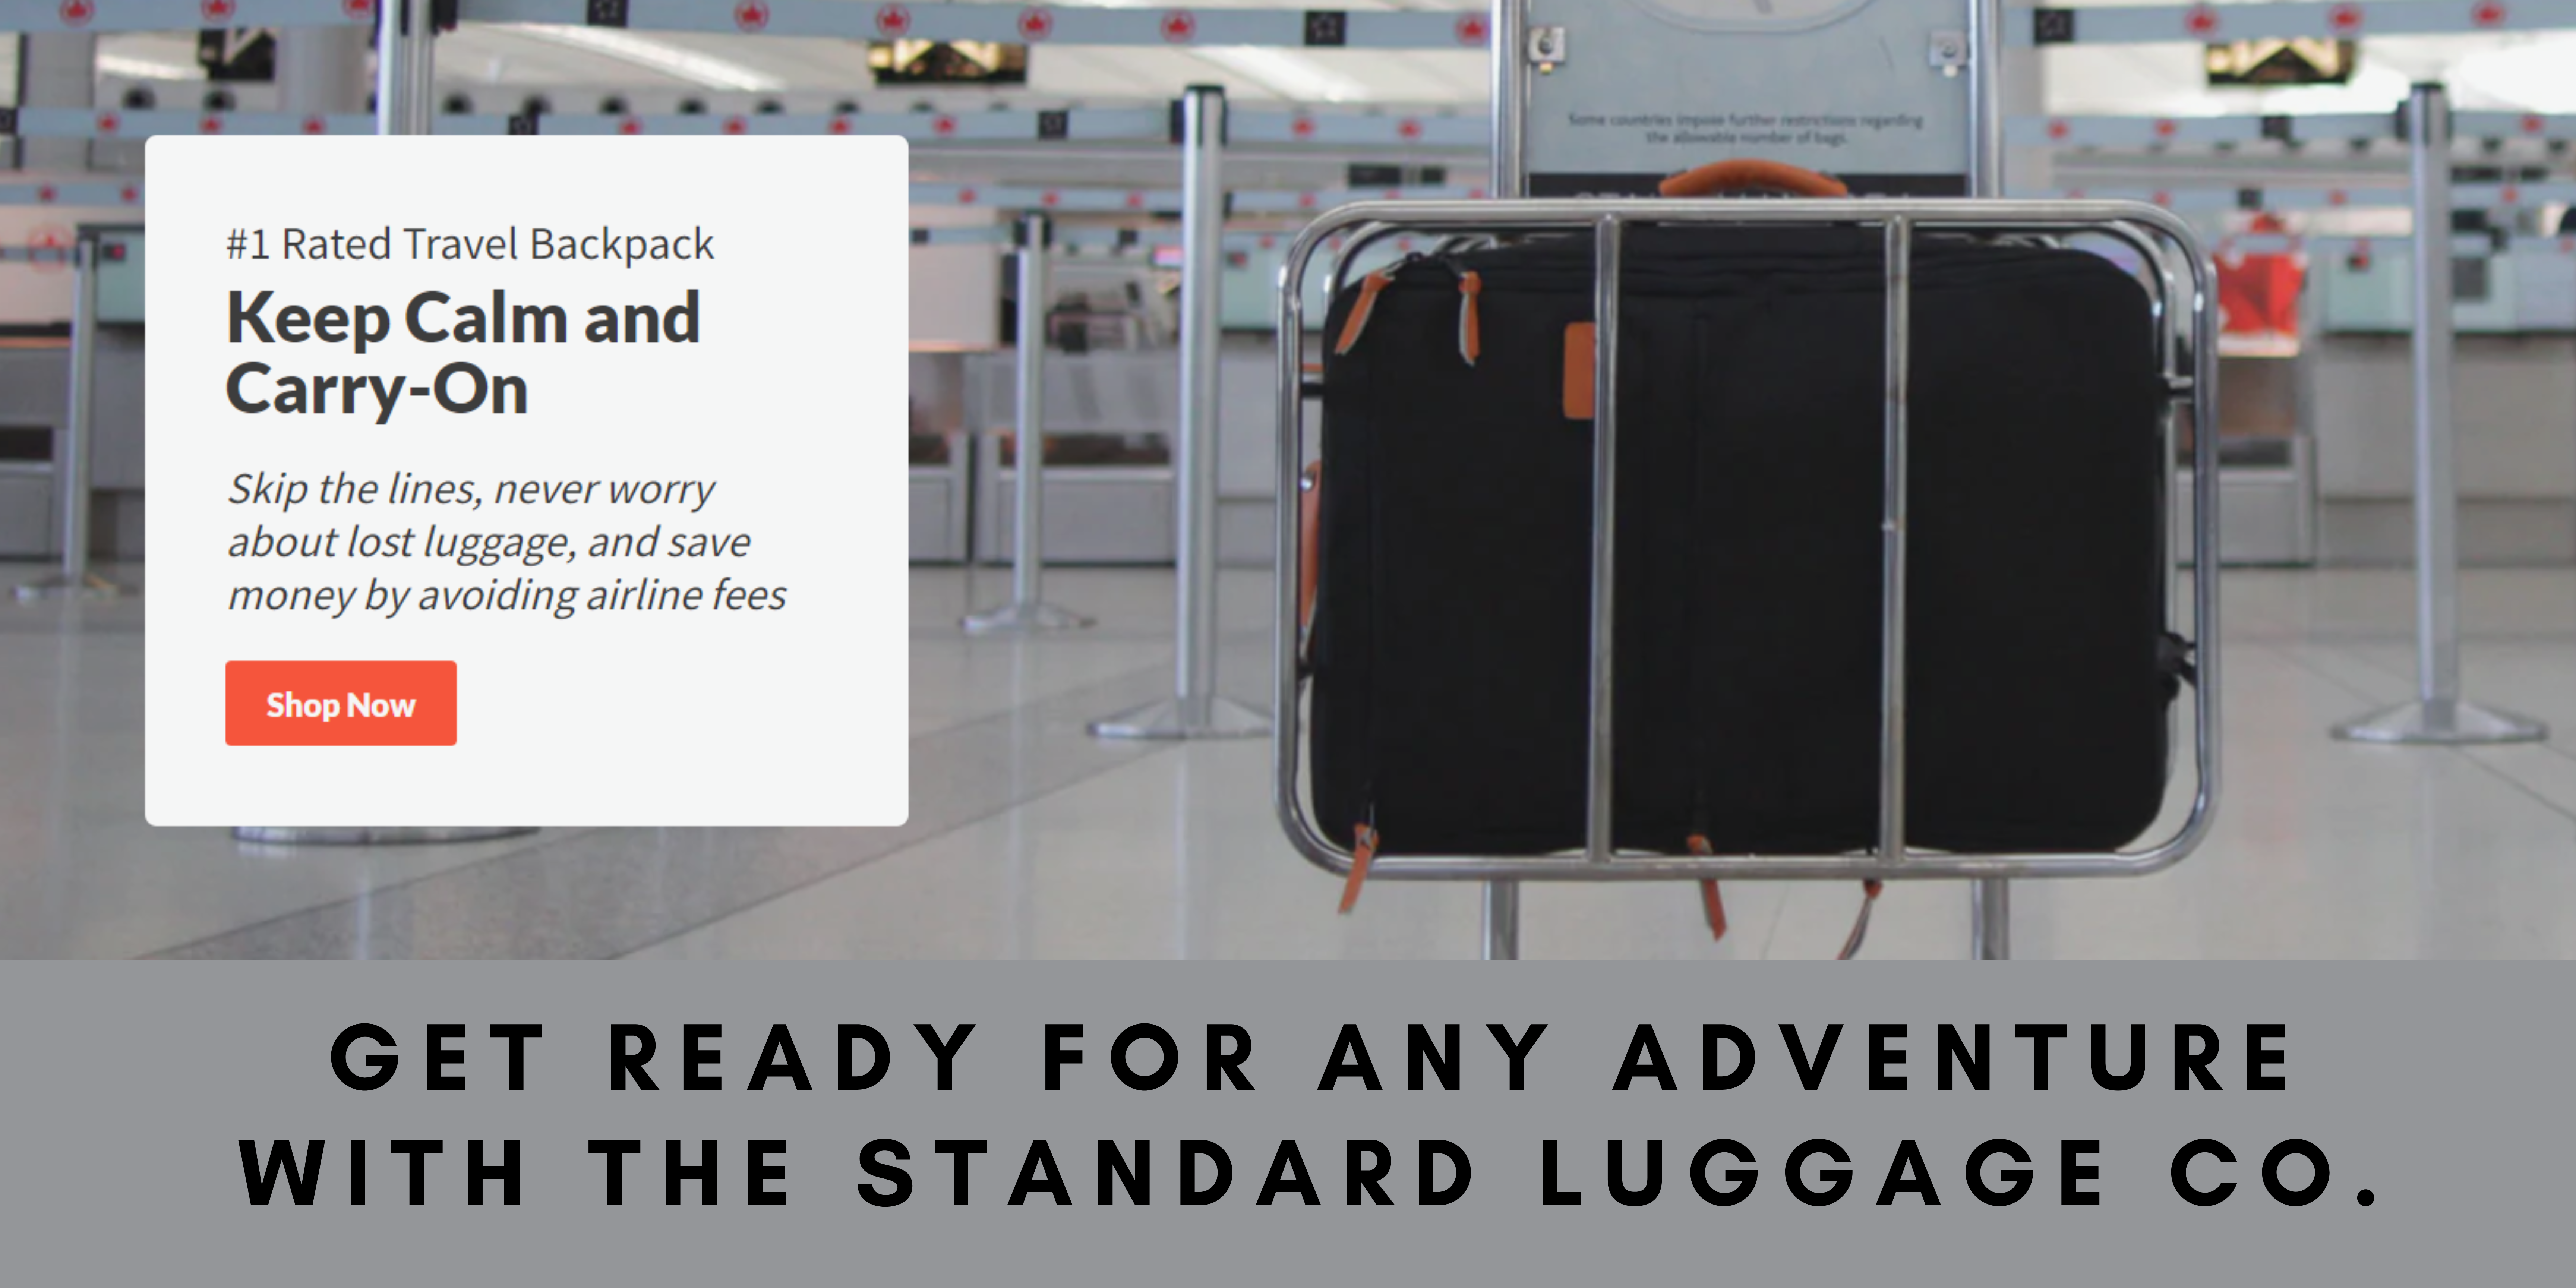 Get Ready For Any Adventure With The Standard Luggage Co.